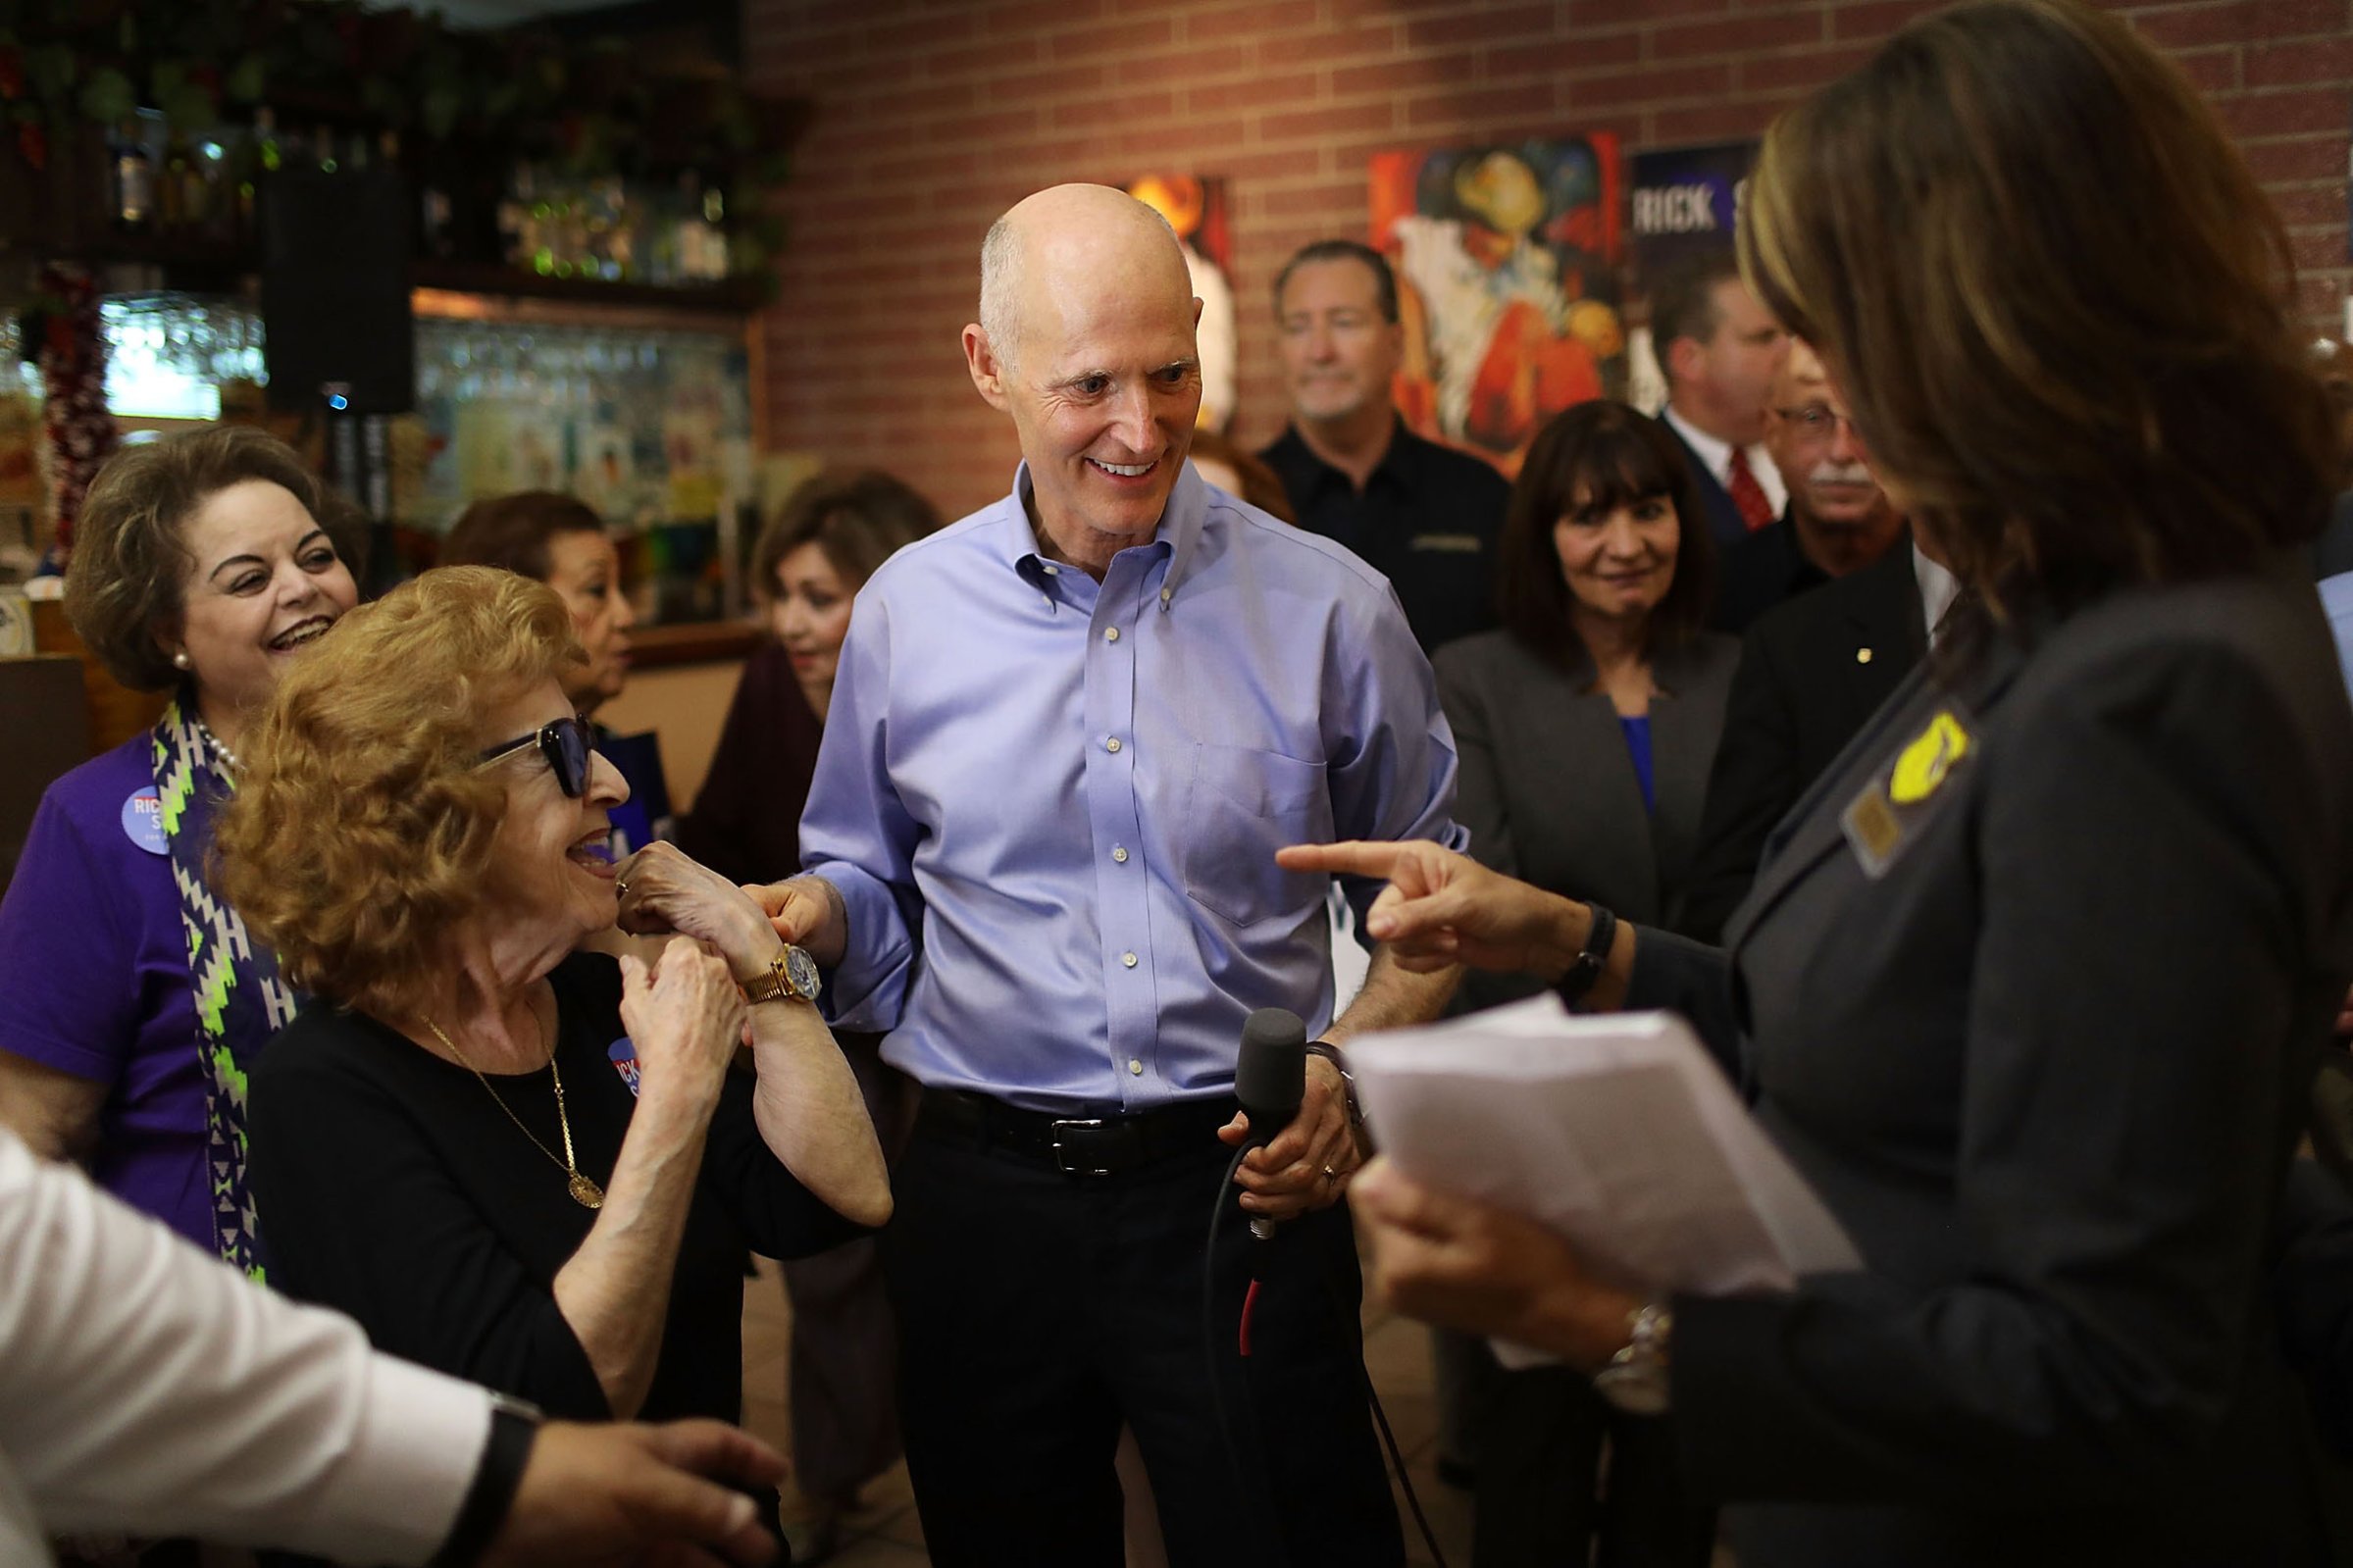 Scott greets voters on June 14 during a campaign stop at Chico’s Restaurant in Hialeah, Fla.